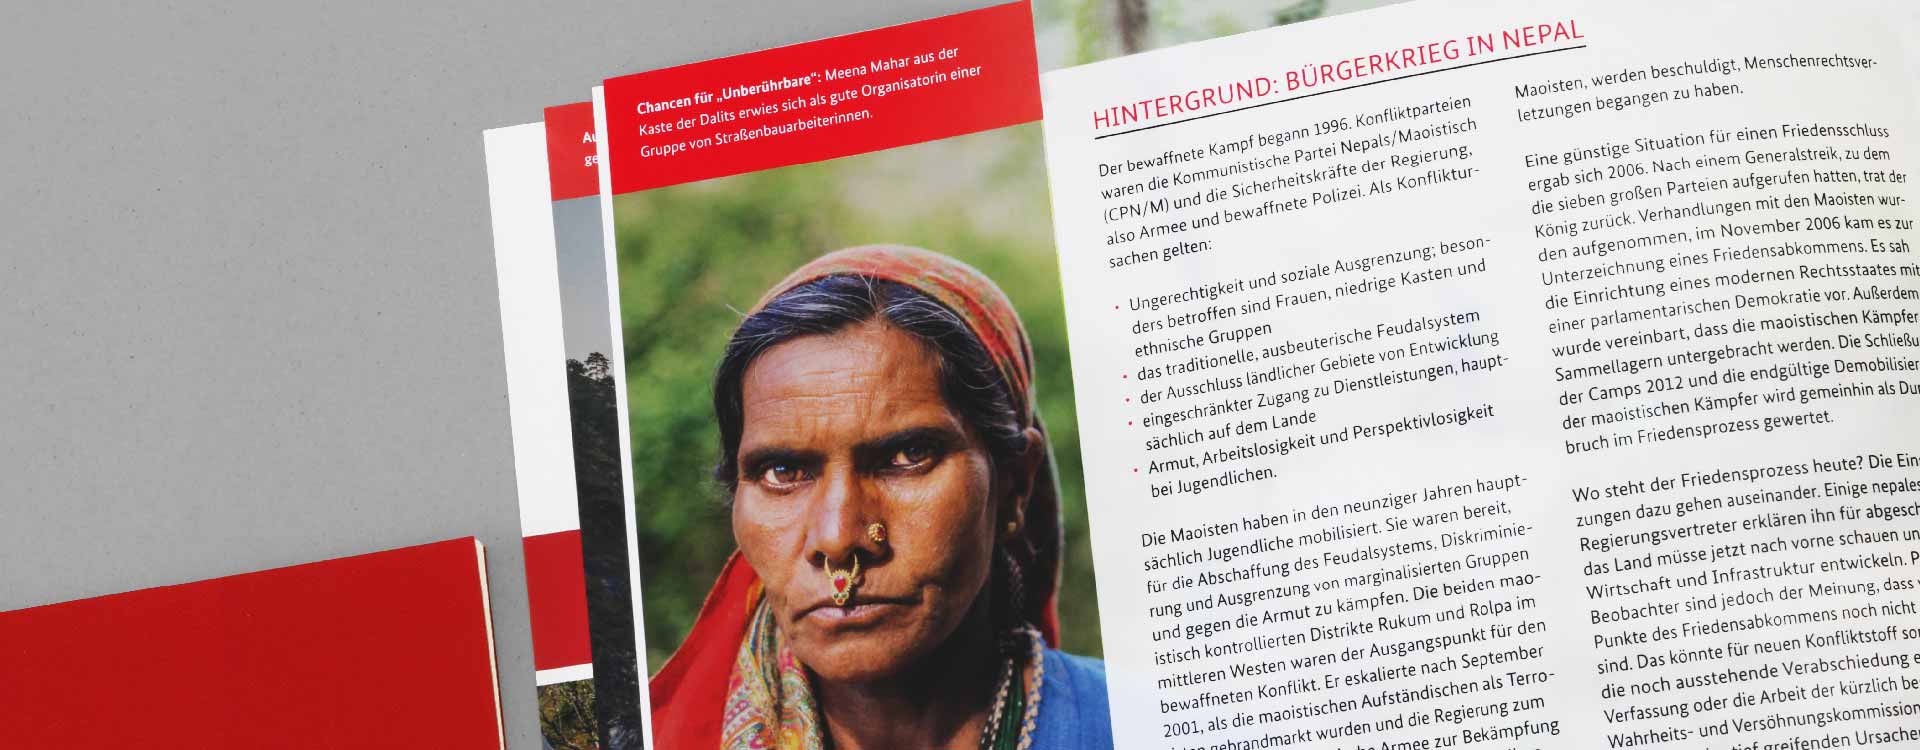 Inside of the brochure German Contribution to the Peace Process in Nepal; Design: Kattrin Richter | Graphic Design Studio